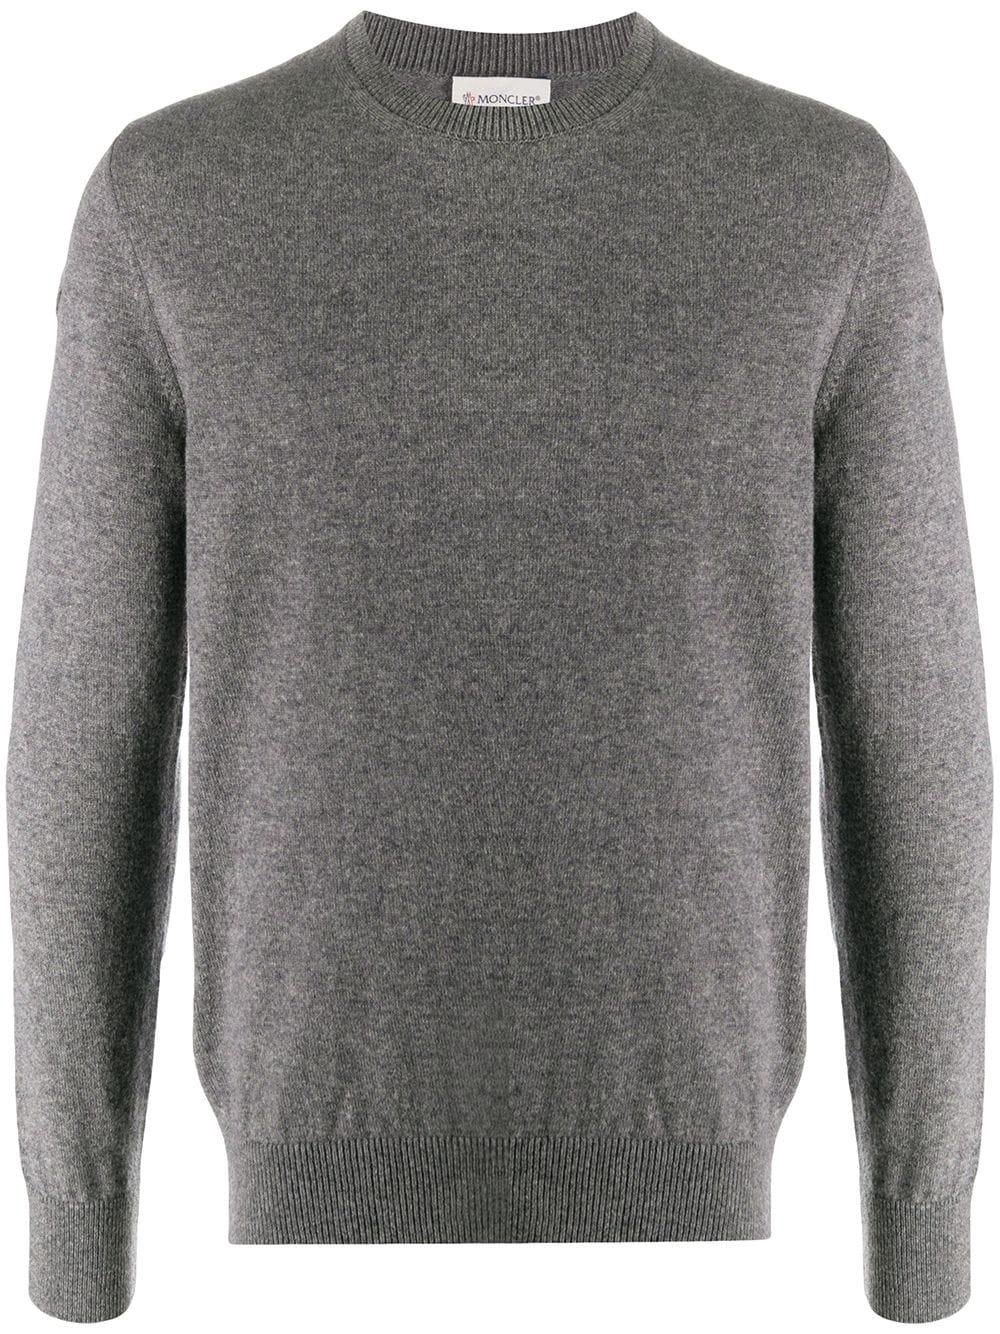 Moncler Wool Knitted Jumper in Grey (Gray) for Men - Lyst